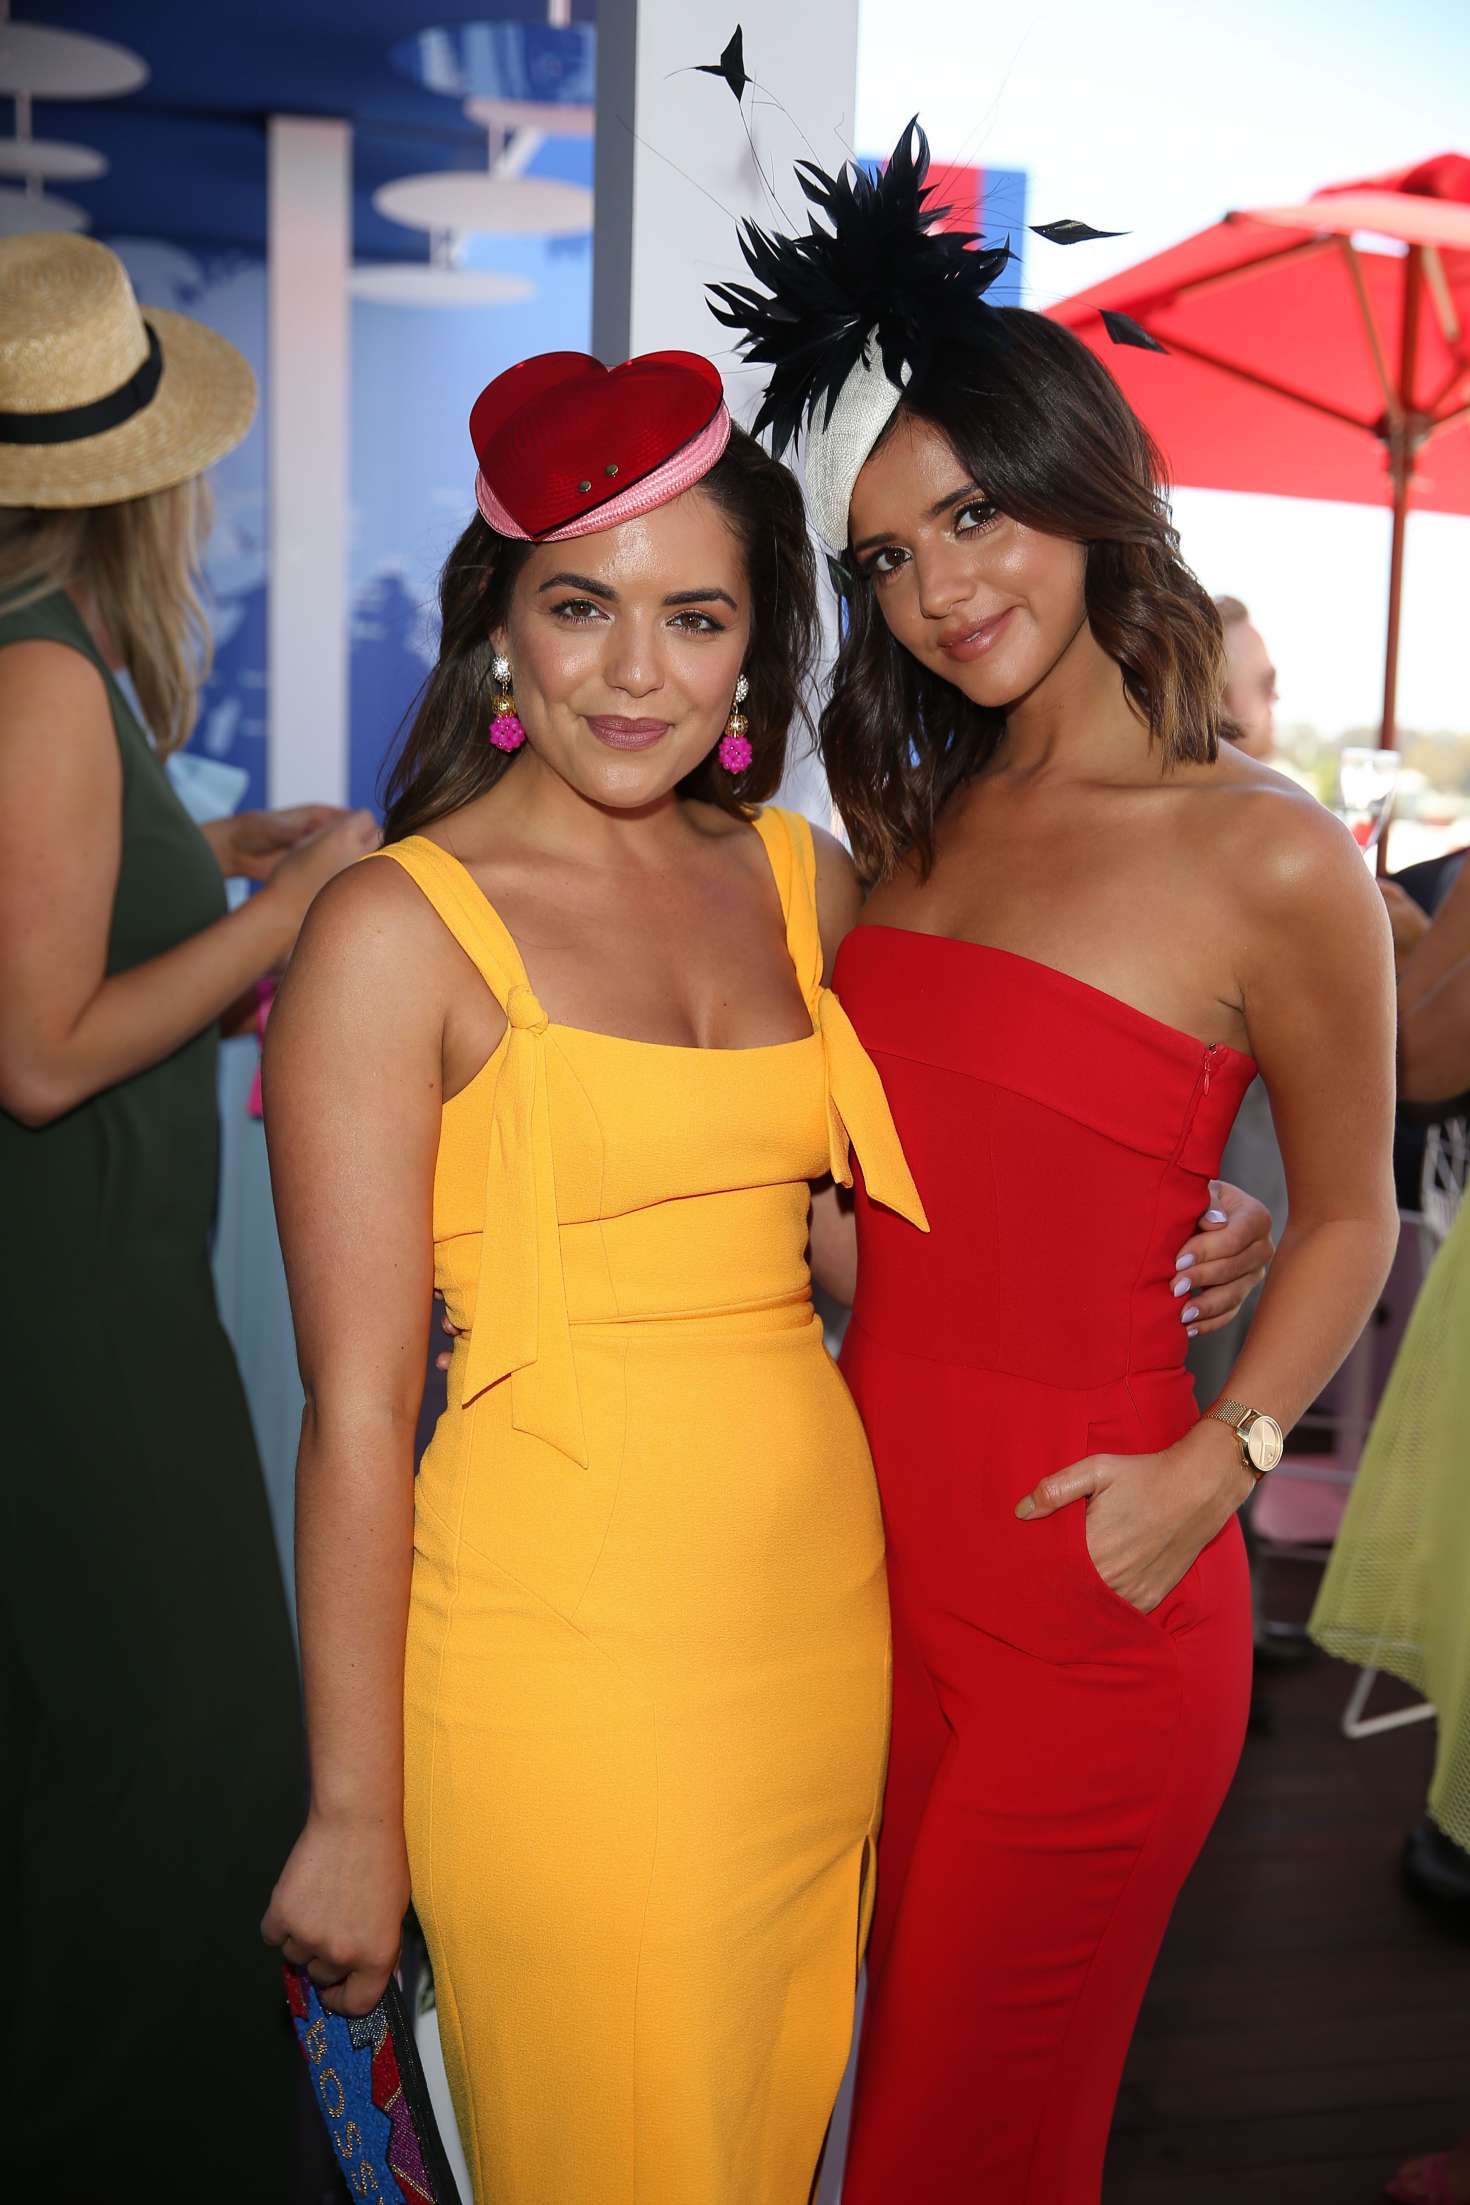 Lucy Mecklenburgh and Olympia Valance - Oaks Day Races in Melbourne